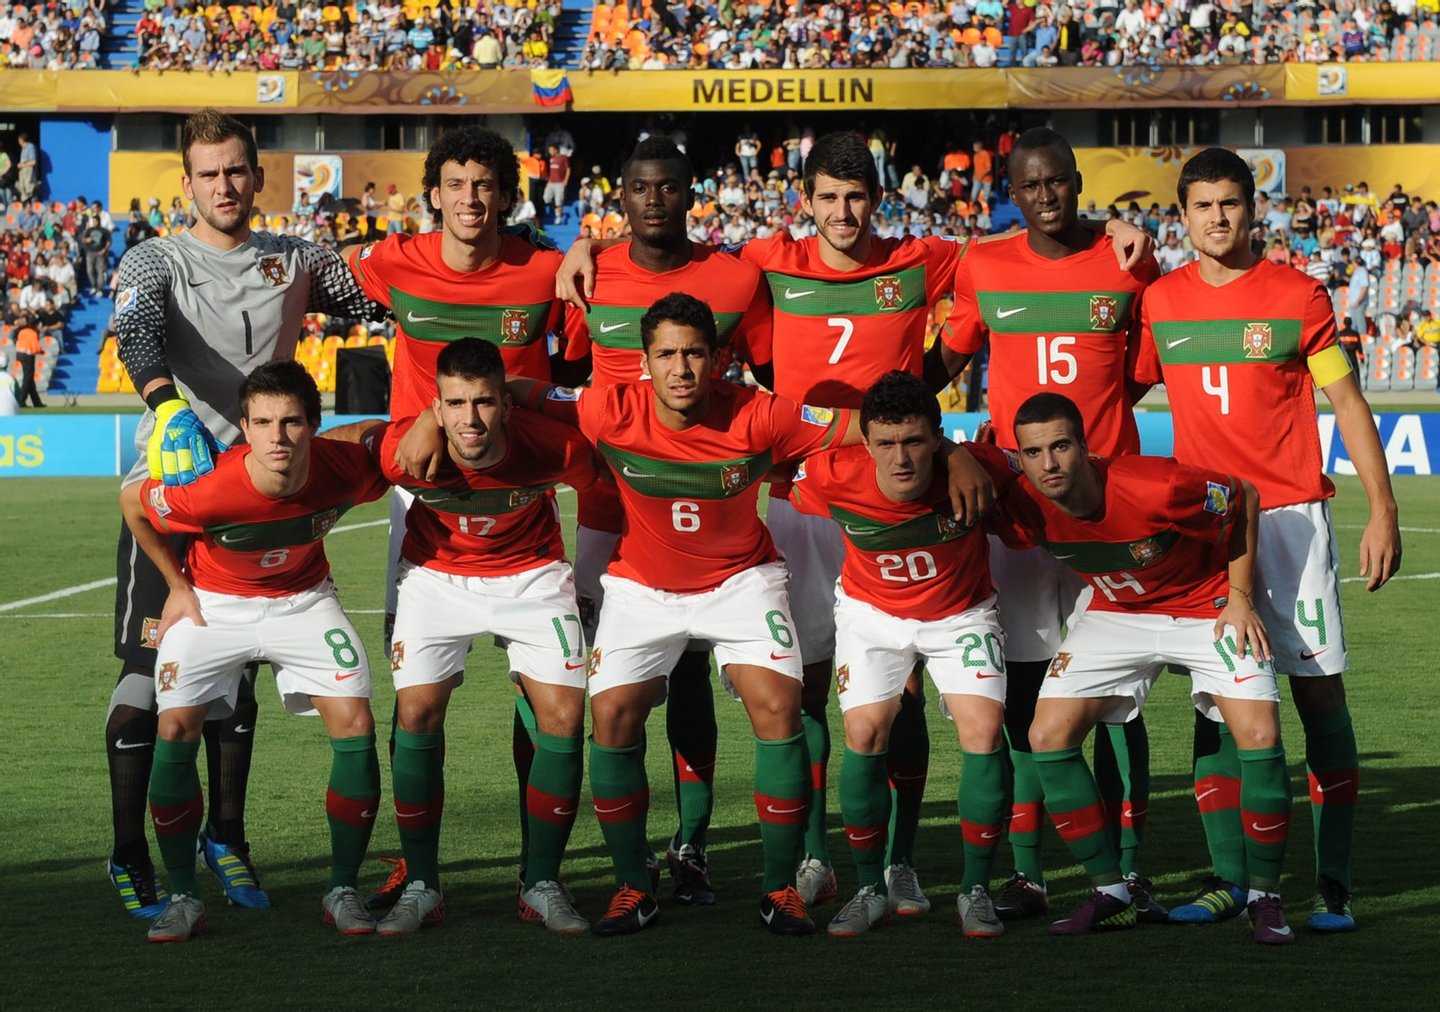 The starting line-up of Portugal poses before their FIFA Under-20 World Cup semifinal football match against France at Atanasio Girardot stadium in Medellin, Colombia on Augst 17, 2011.(L to R top) Mika, Roderick, Pele, Nelson Oliveira, Danilo, Nuno Reis. (Below) Cedric, Sergio Oliveira, Julio Alves, Mario Rui, Alex. Portugal won by 2-0. AFP PHOTO/Raul ARBOLEDA (Photo credit should read RAUL ARBOLEDA/AFP/Getty Images)